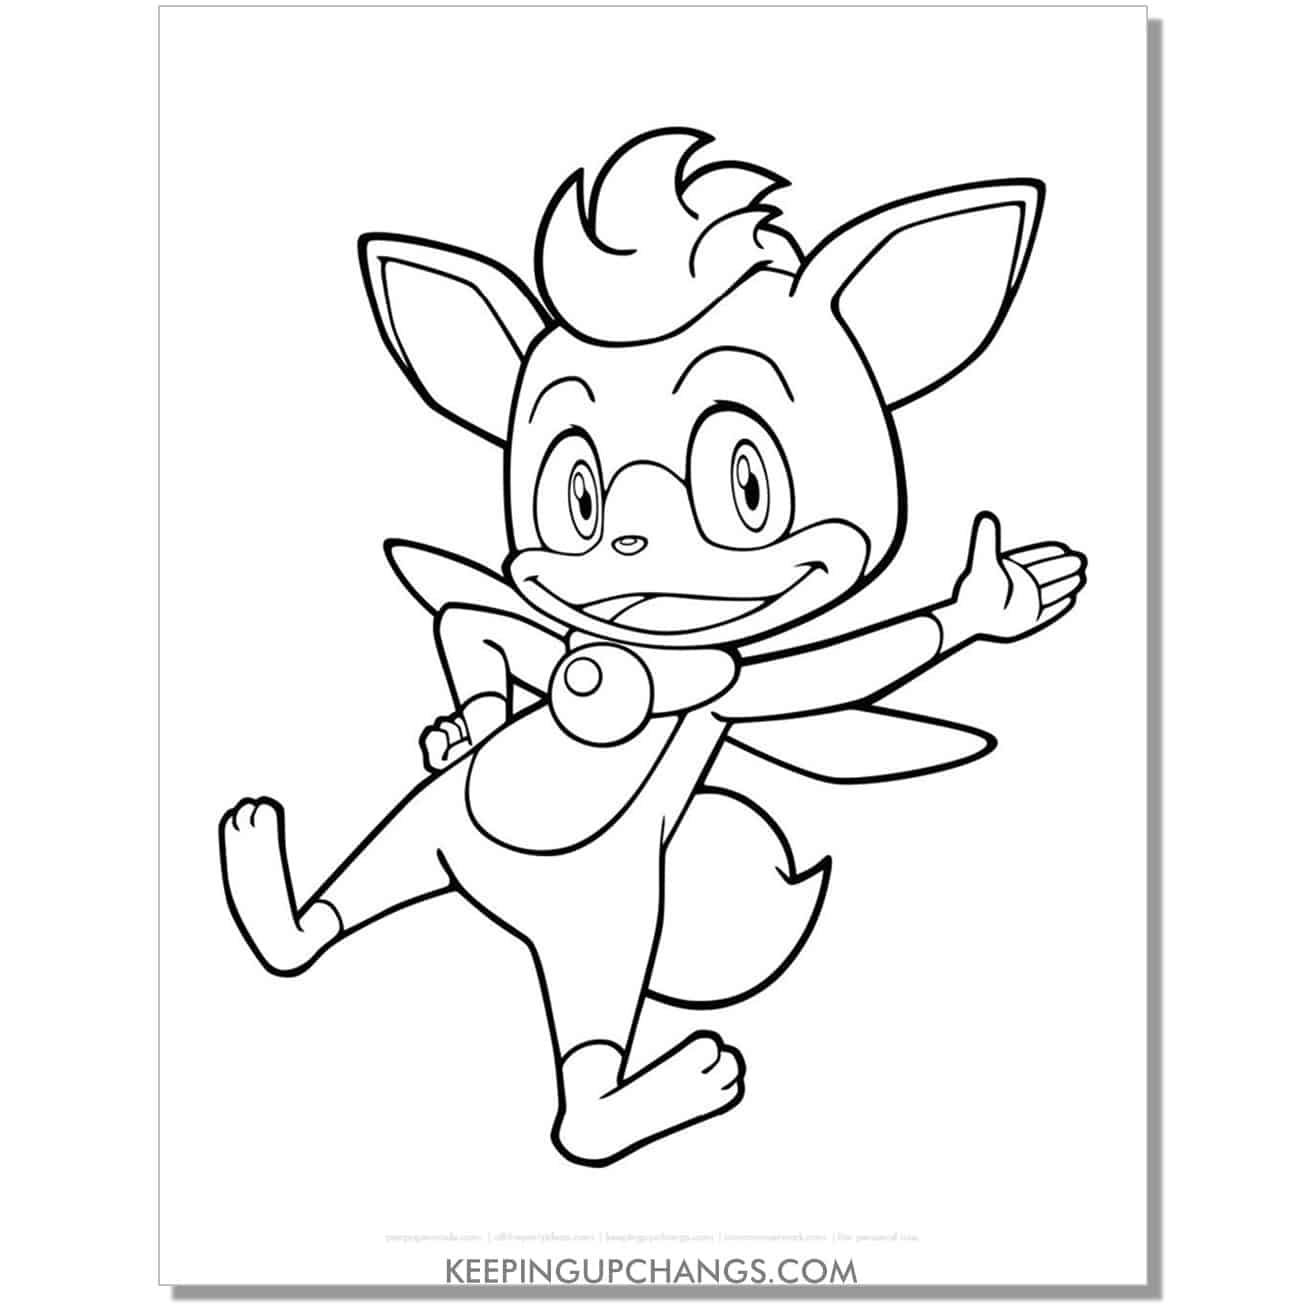 chip light gaia sonic coloring page.